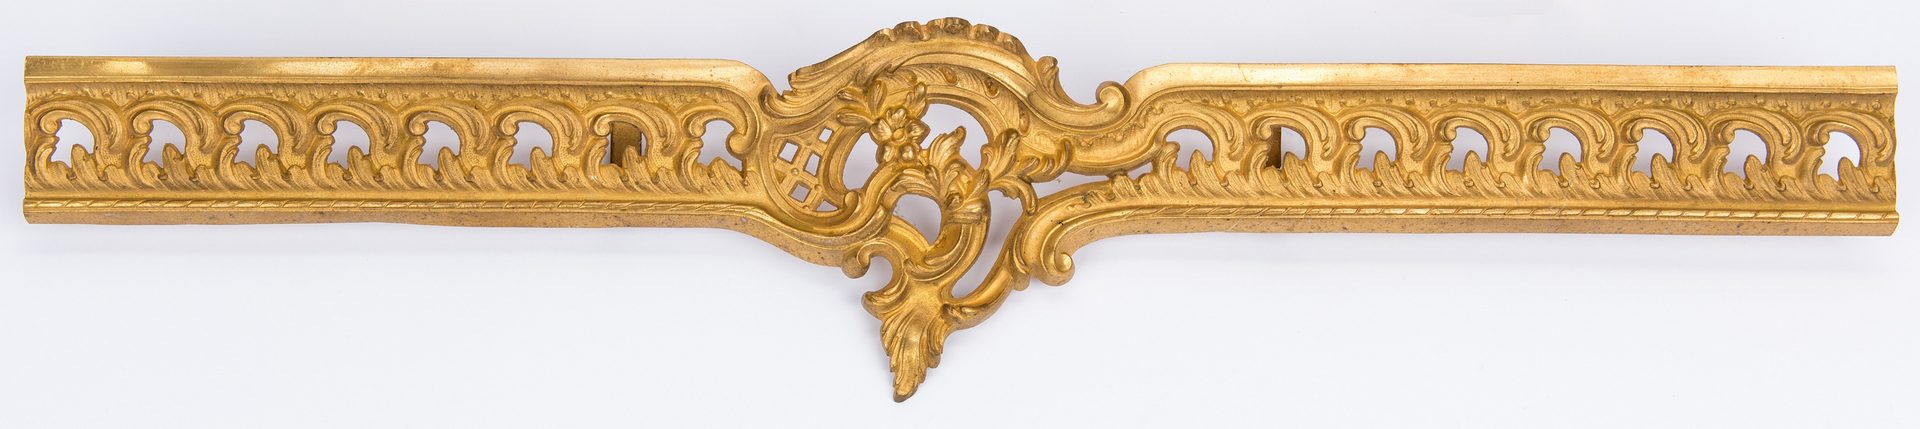 Lot 153: French Gilt Bronze Fireplace Fender & Chenets